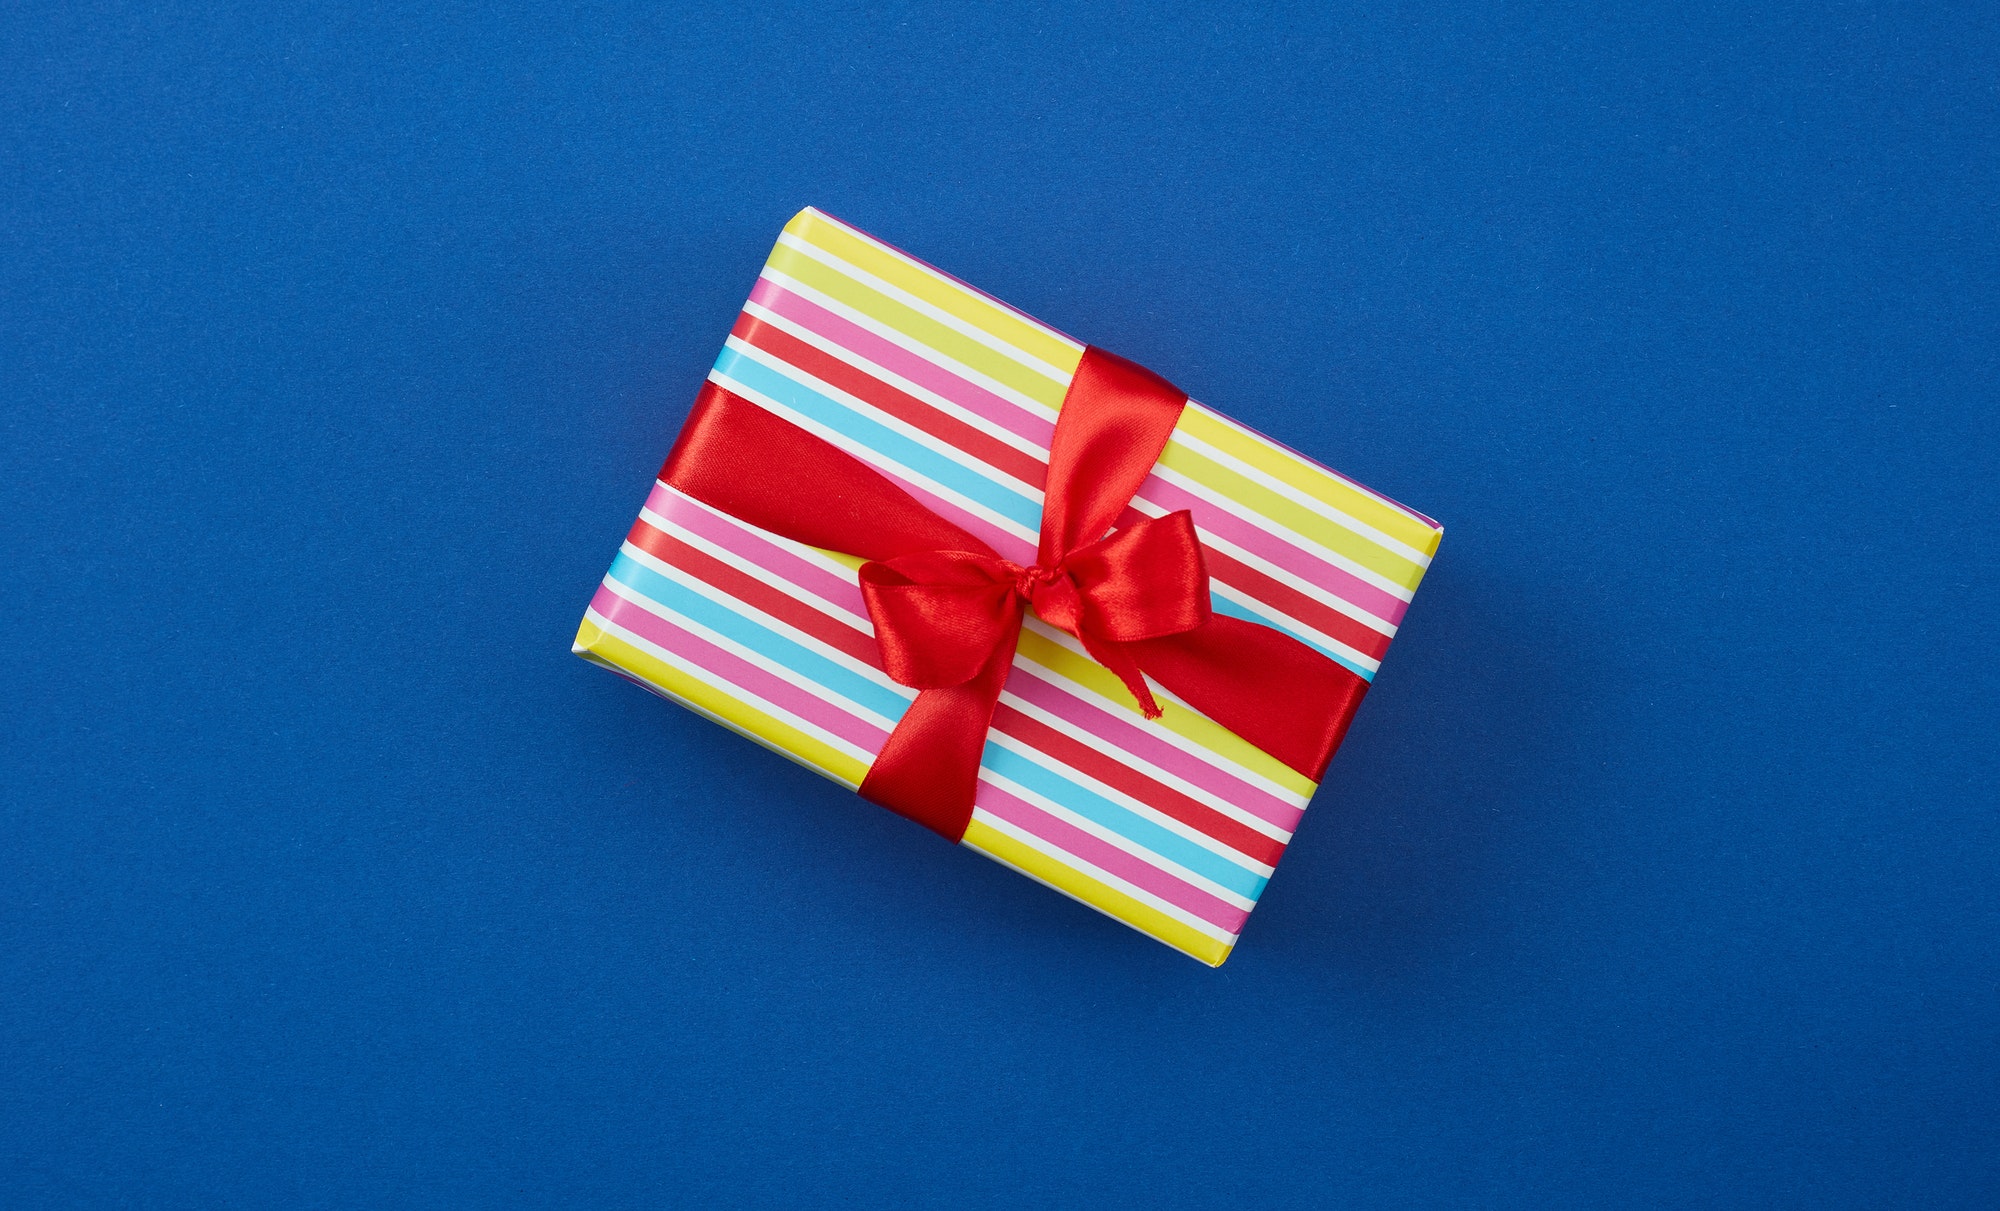 How to get reviews on Amazon: image of a wrapped gift box that a customer would receive